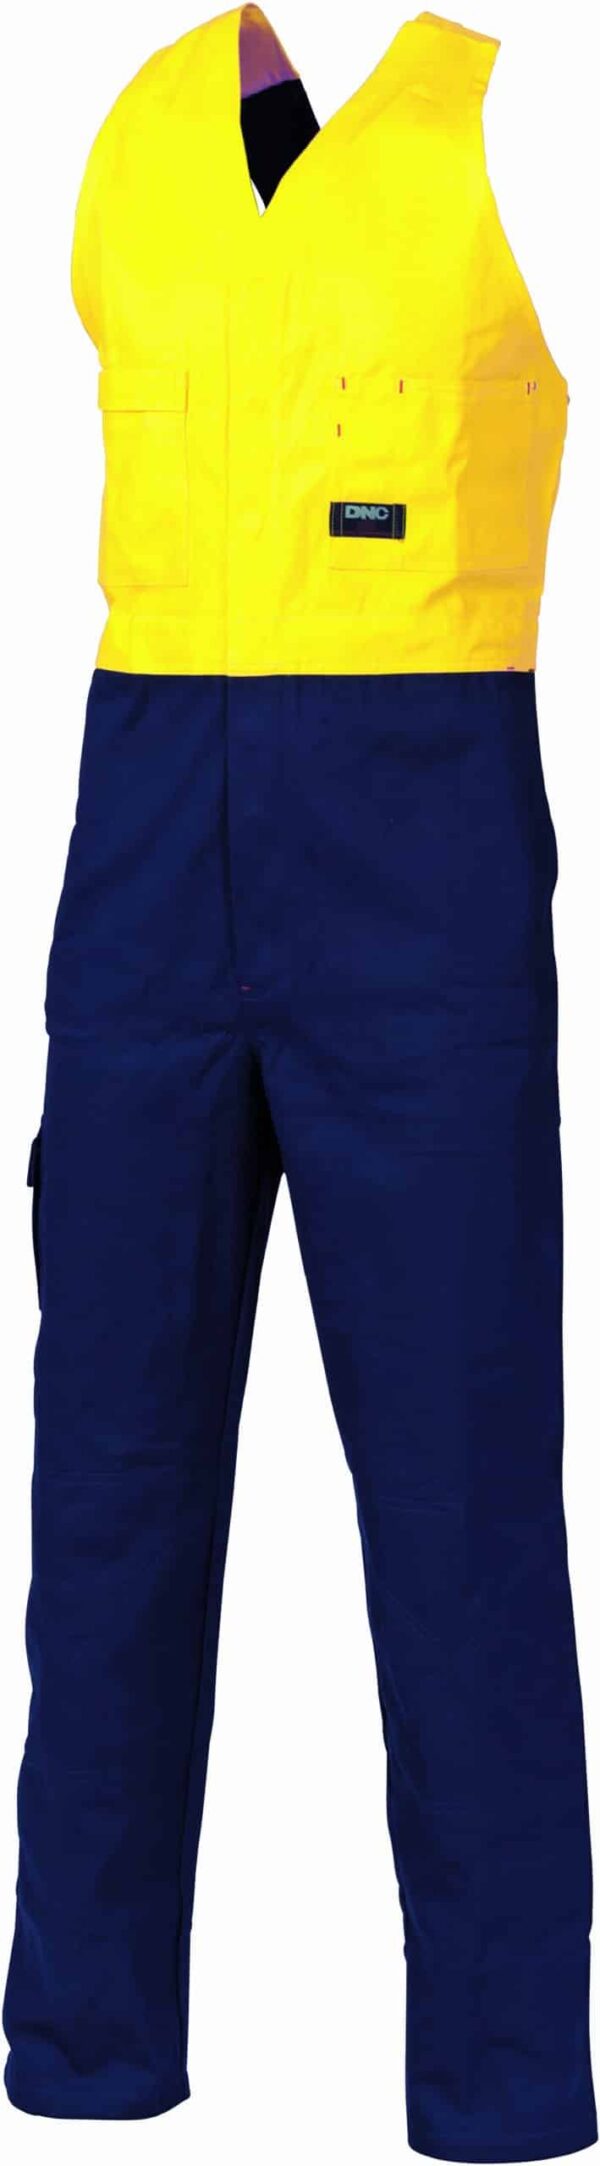 DNC Workwear Hi Vis Two Tone Cotton Action Back Overall